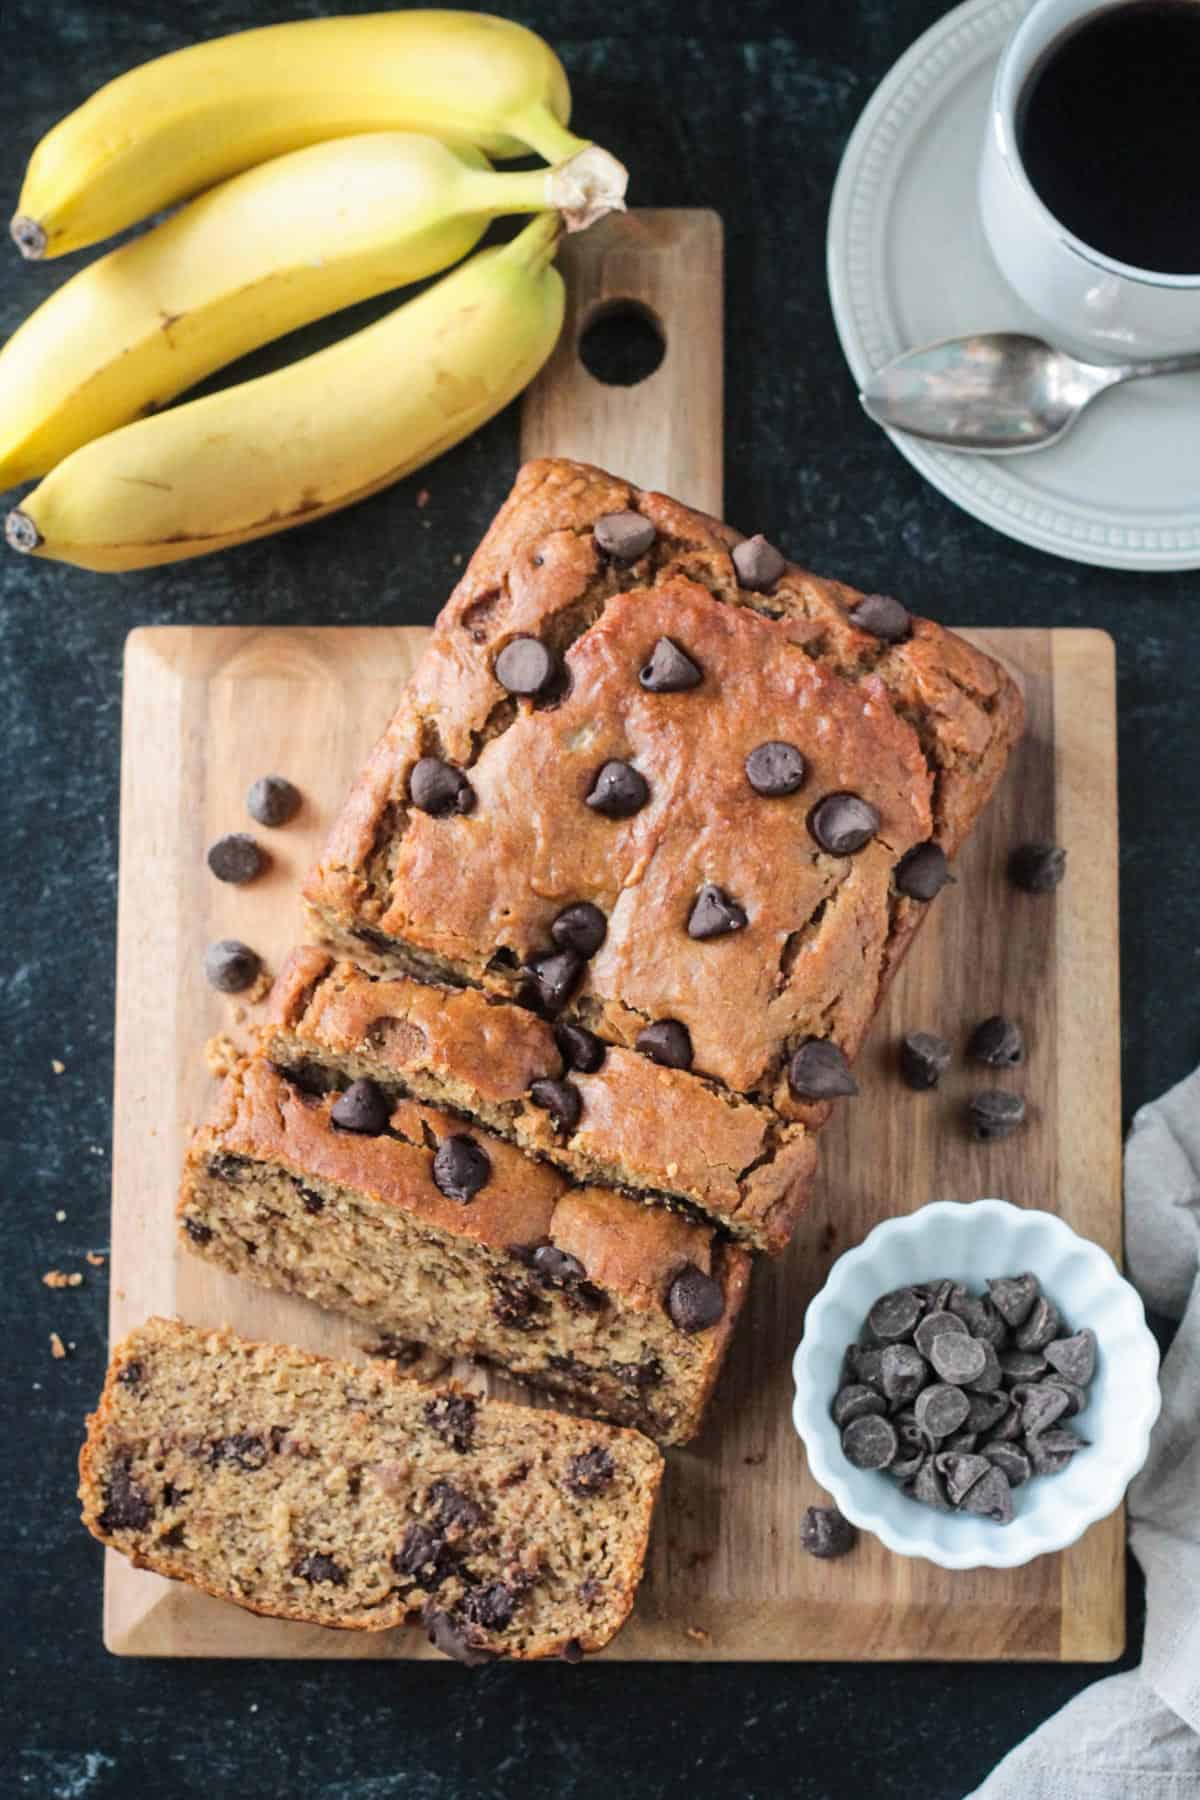 Sliced loaf of vegan peanut butter banana bread on a serving board next to a bunch of bananas.